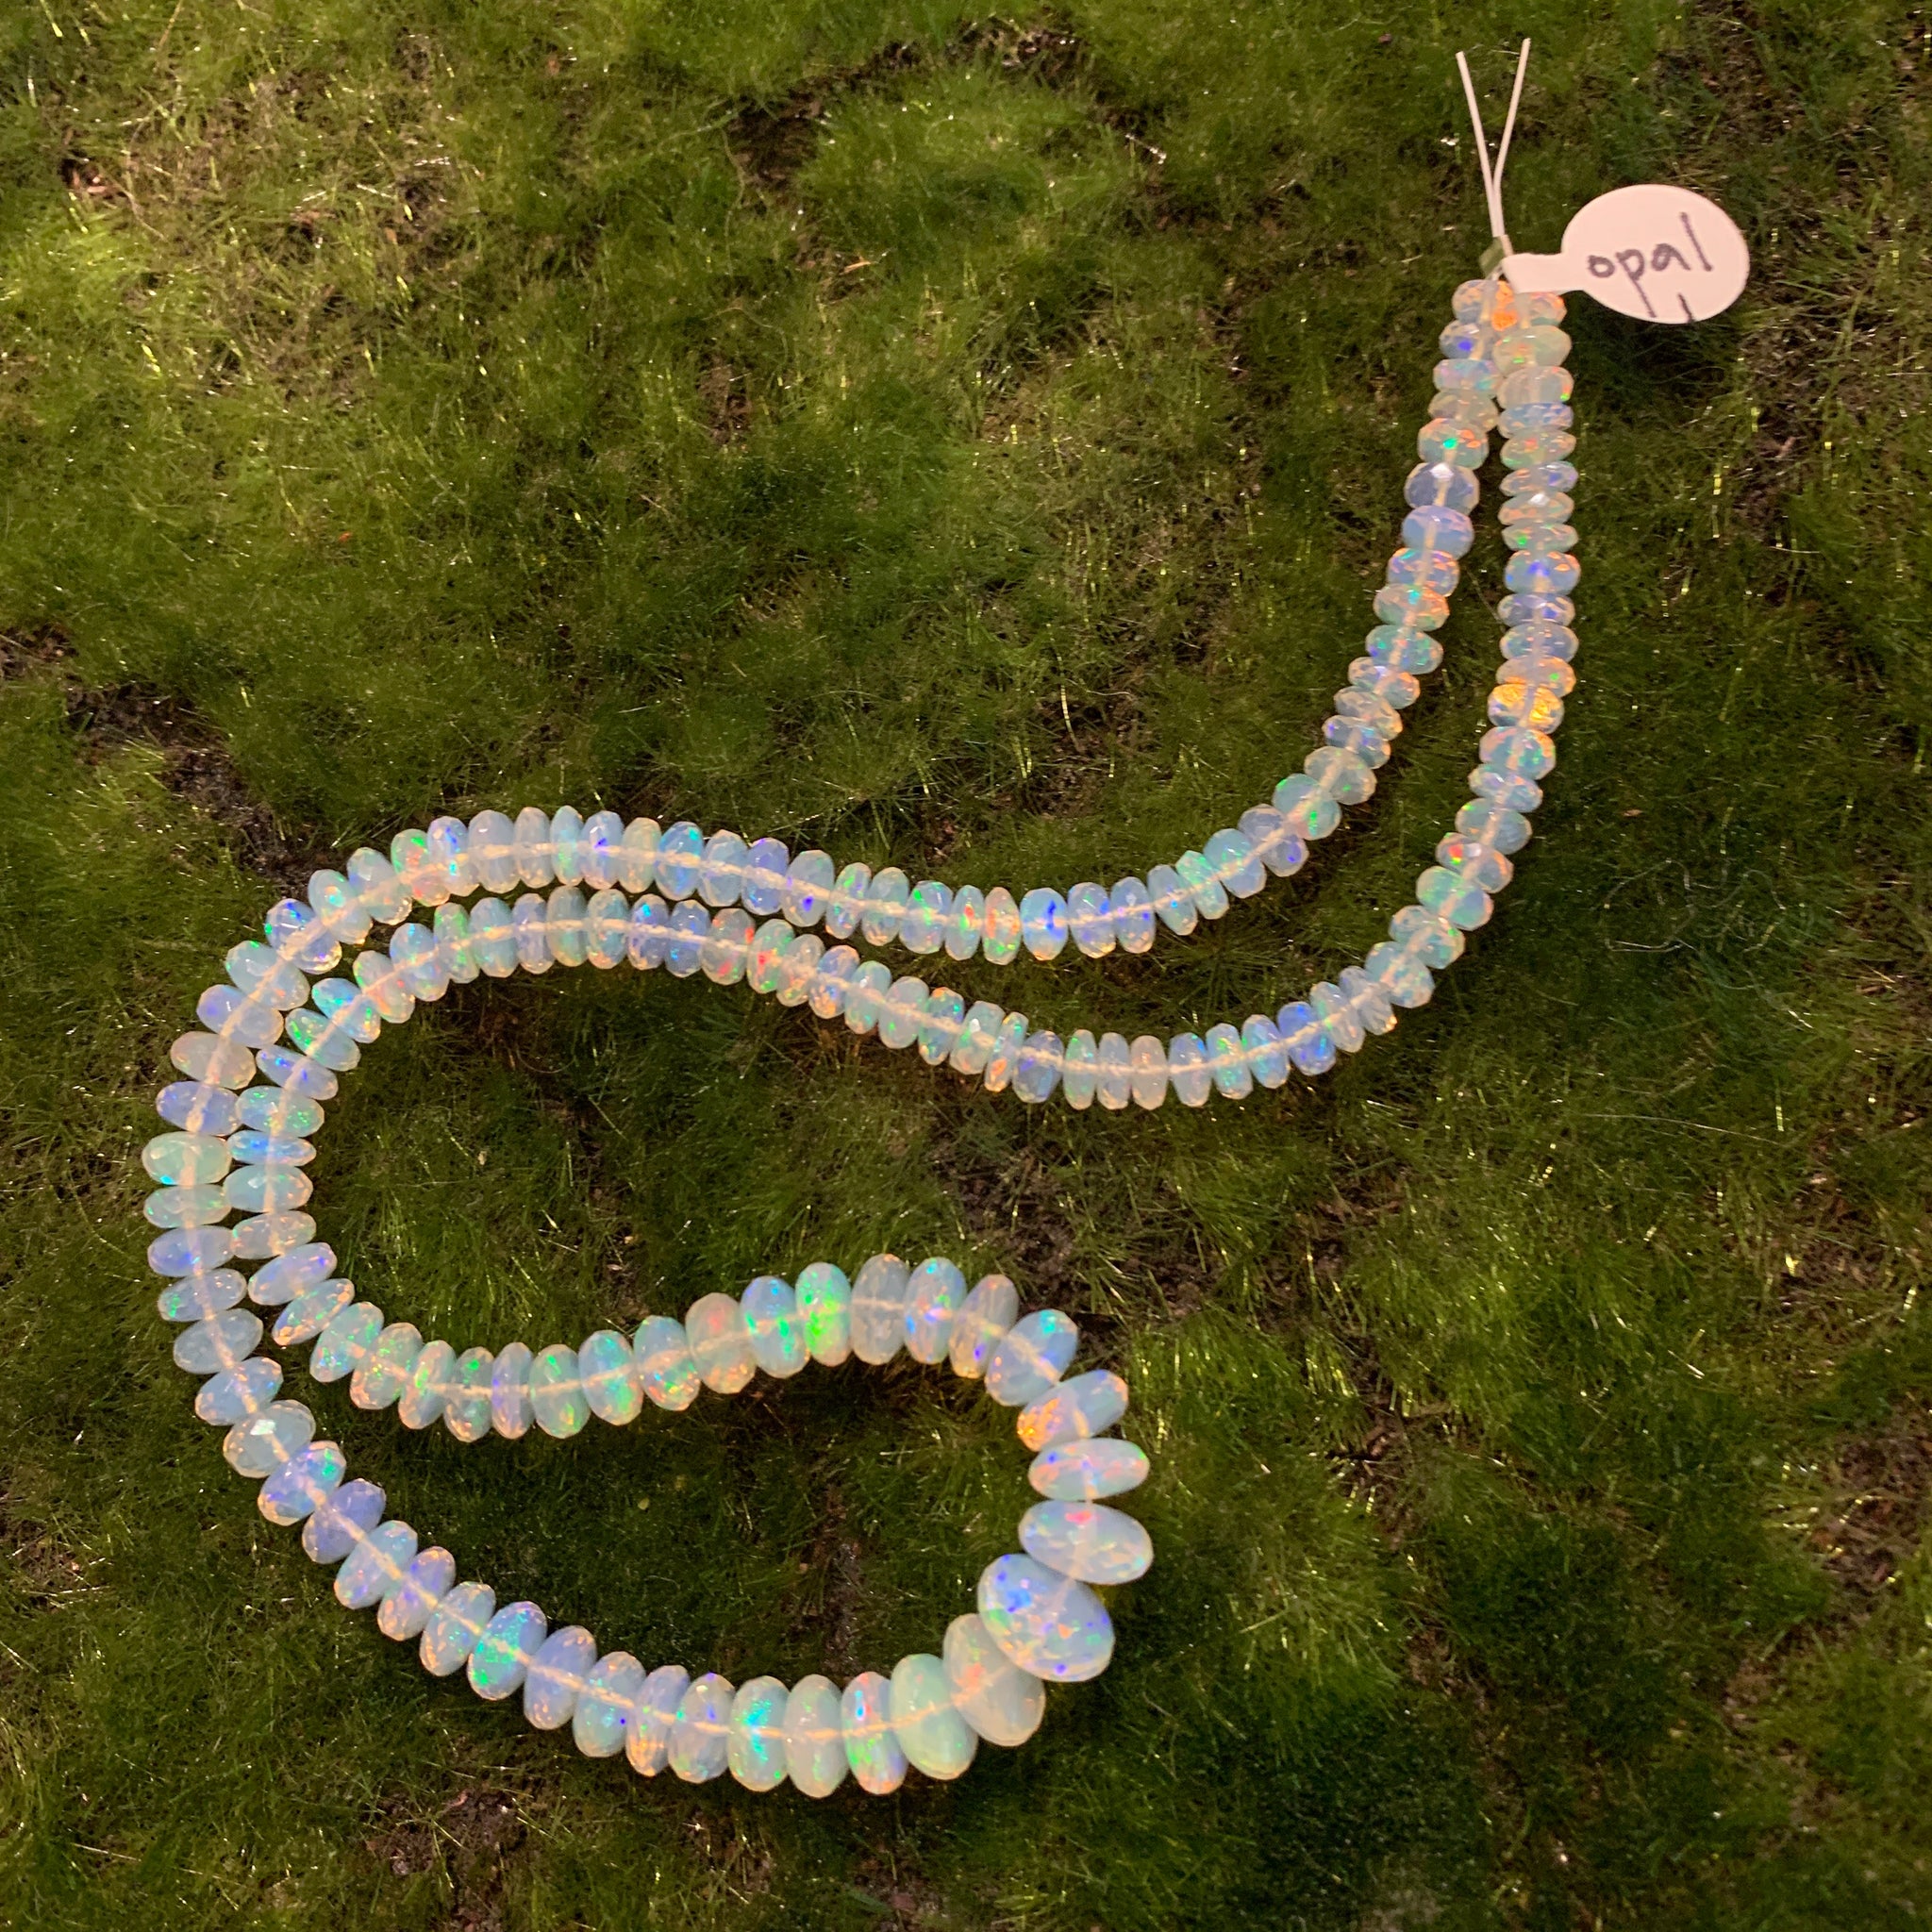 Natural Ethiopian Opal Smooth Pear Beads | 4x6 mm to 7x10 mm | Opal Jewelry  Making Beads | 16 Inches Full Strand | Price Per Strand